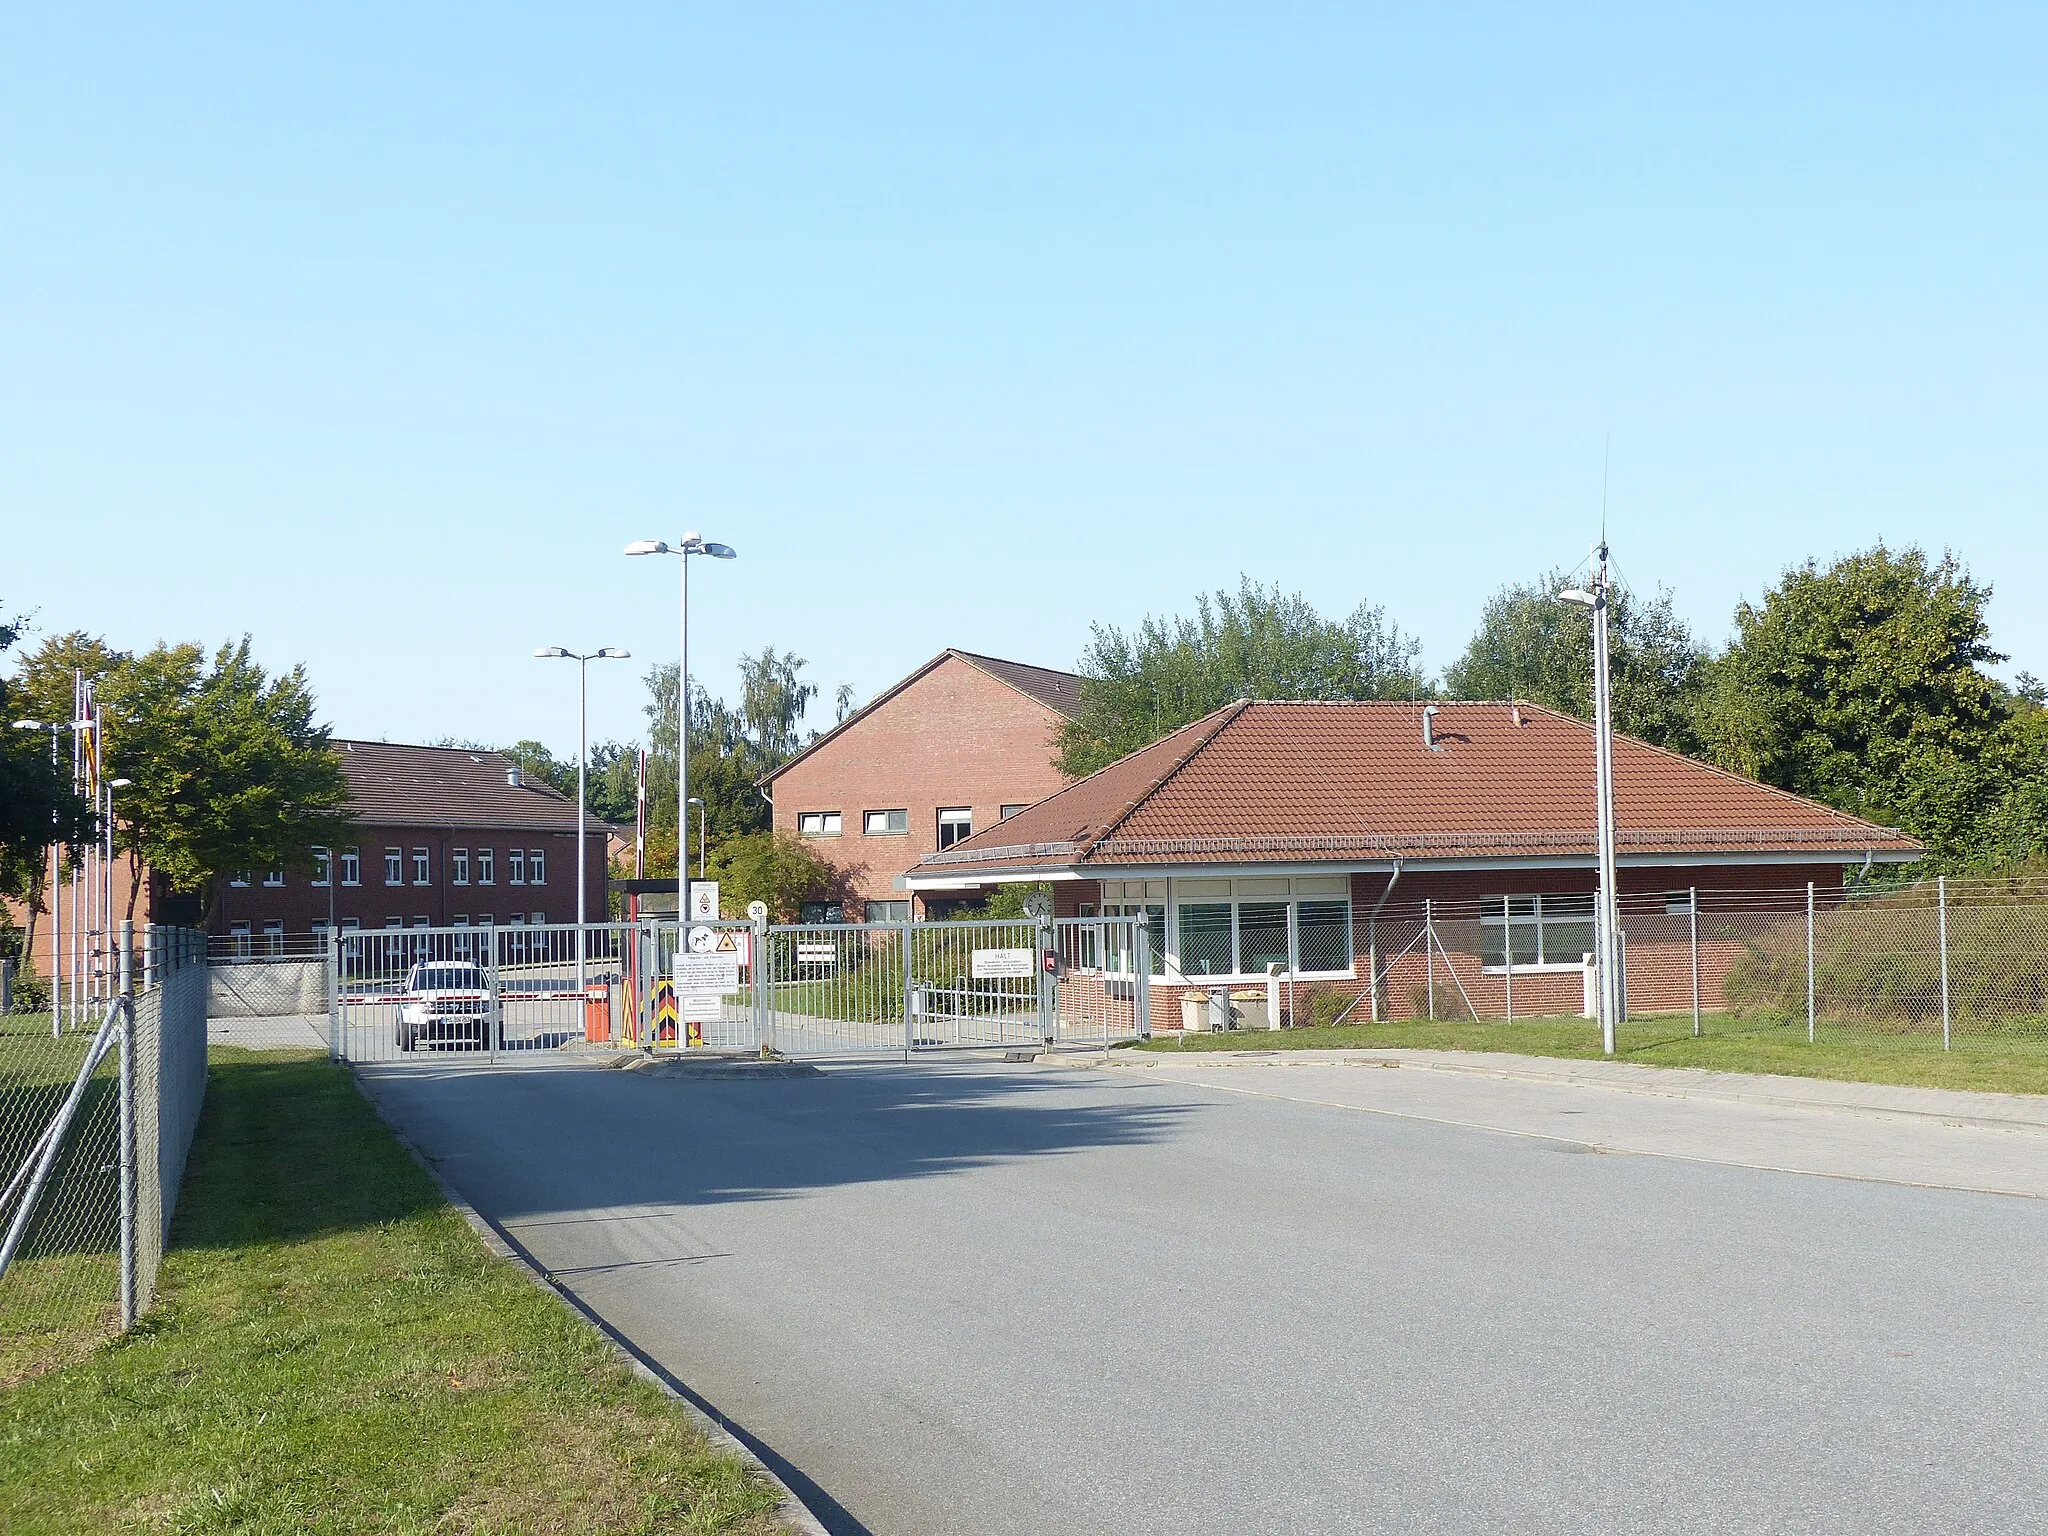 Photo showing: The military shooting range Todendorf, situated in the municipality of Panker